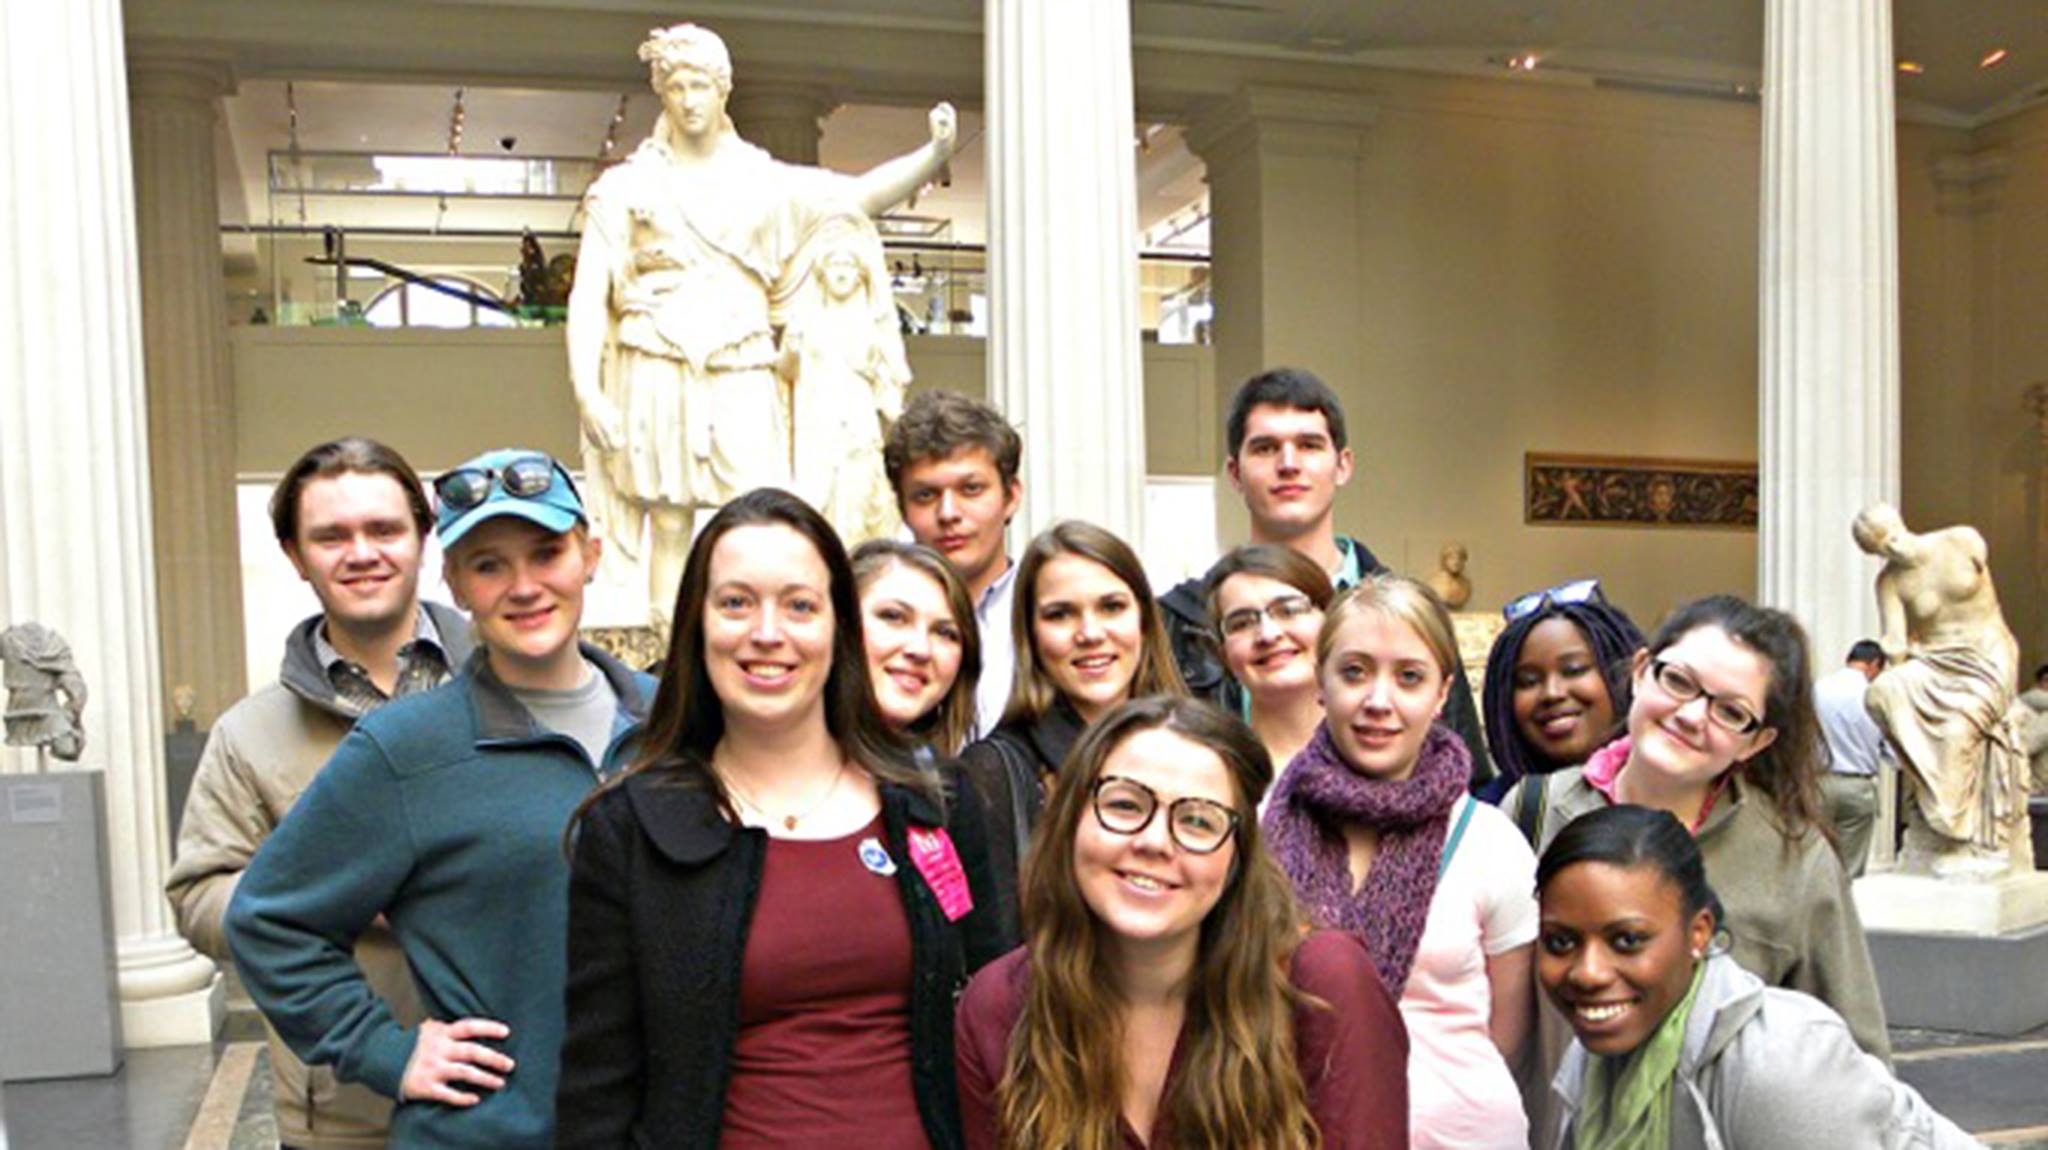 classics class studying antiquities took an educational trip to New York over spring break.